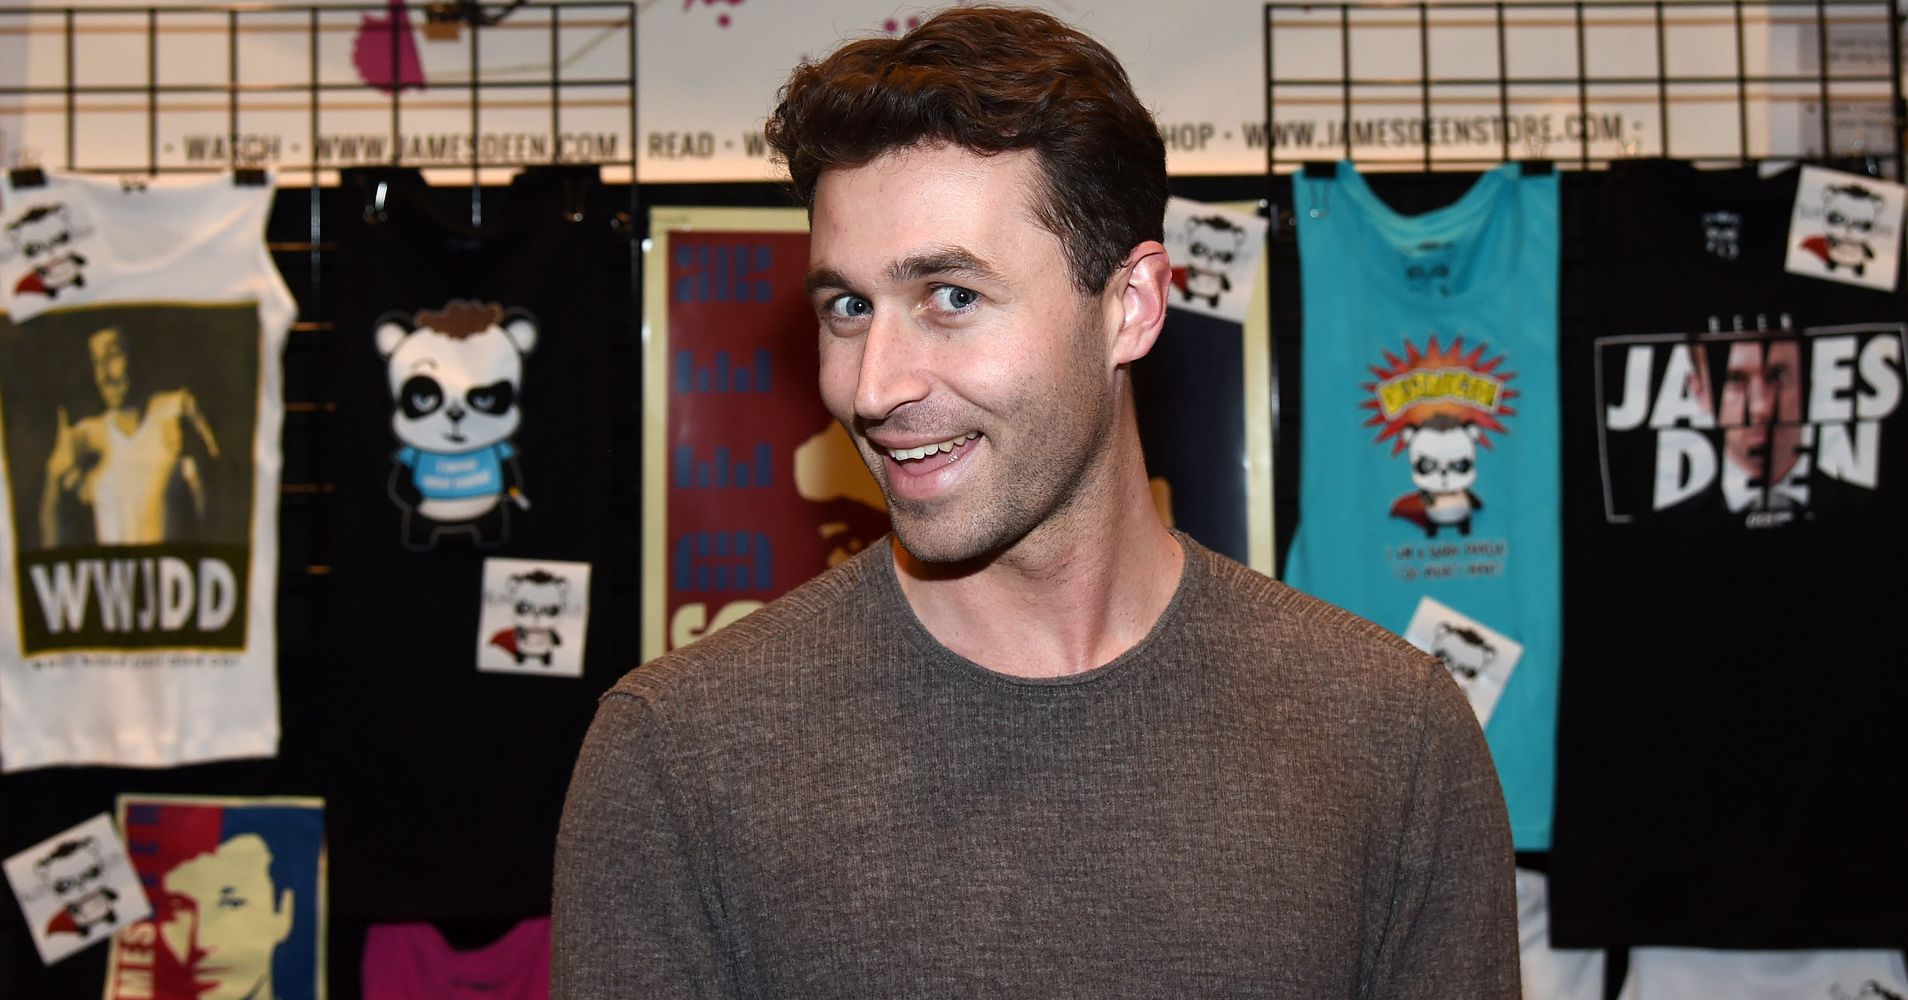 James Deen Says Hes Shocked By Sexual Assault Allegations Huffpost